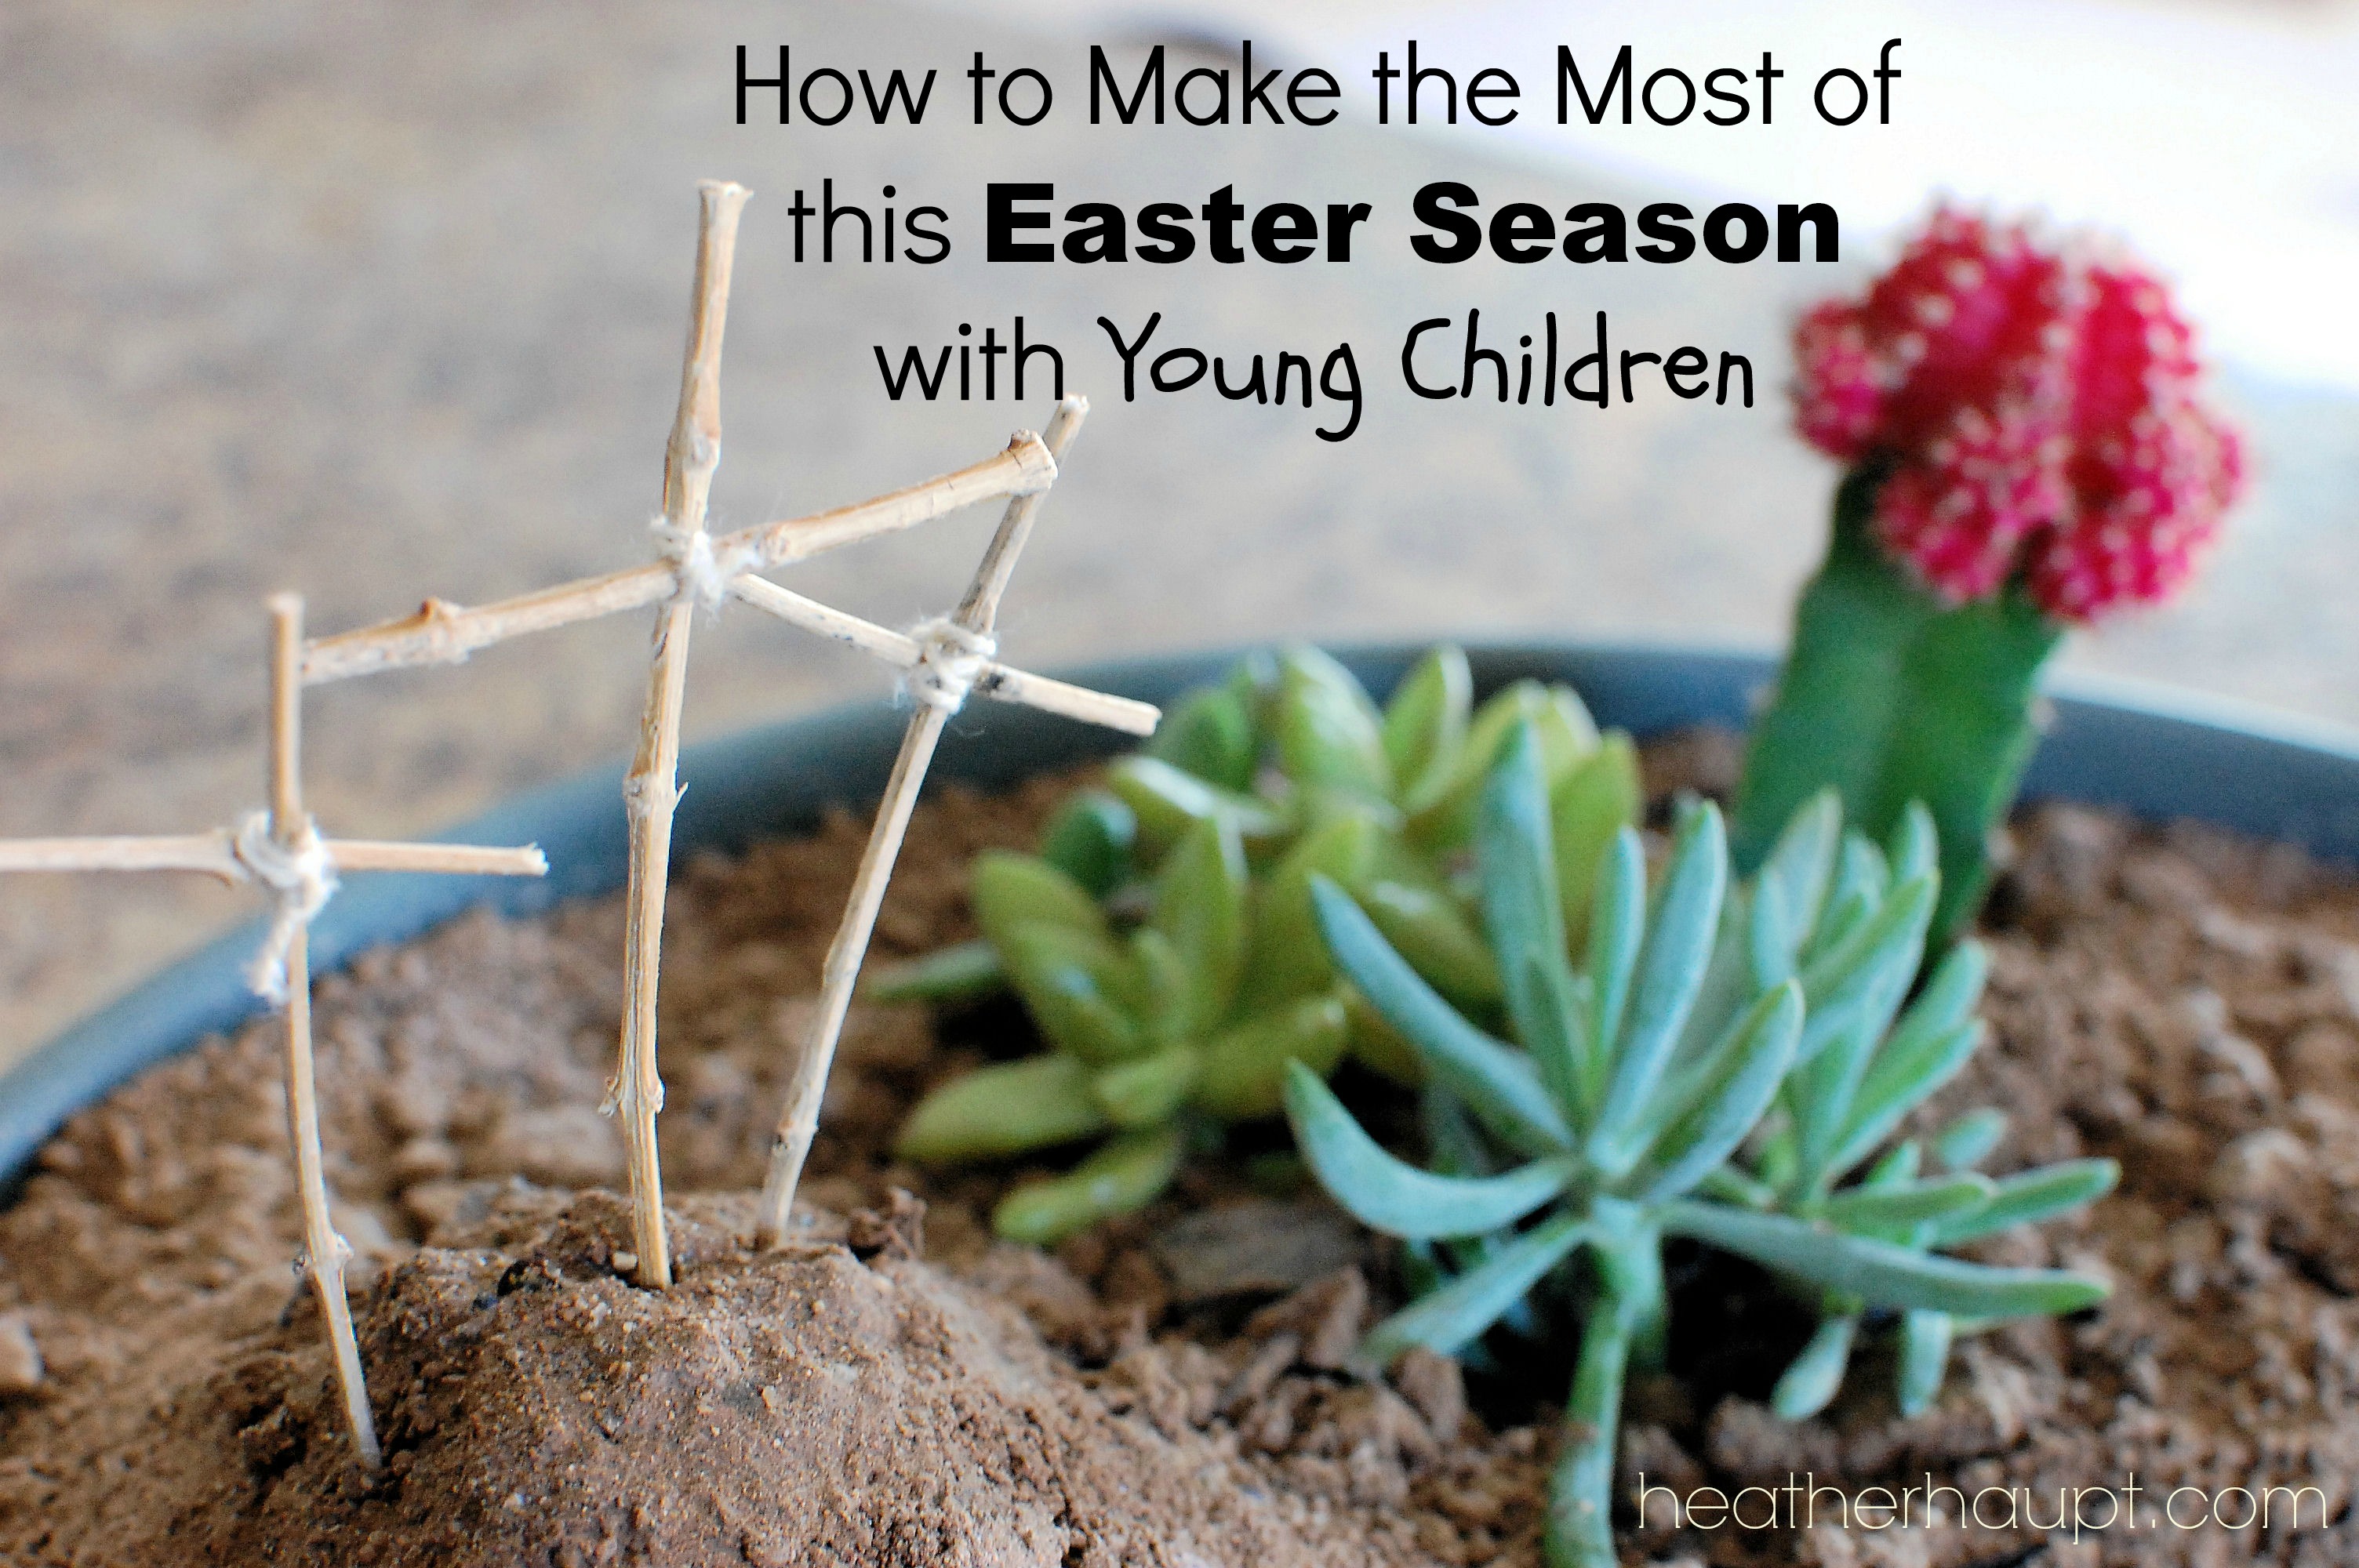 Tips and creative ideas to make such a deep topic relate-able to young children!